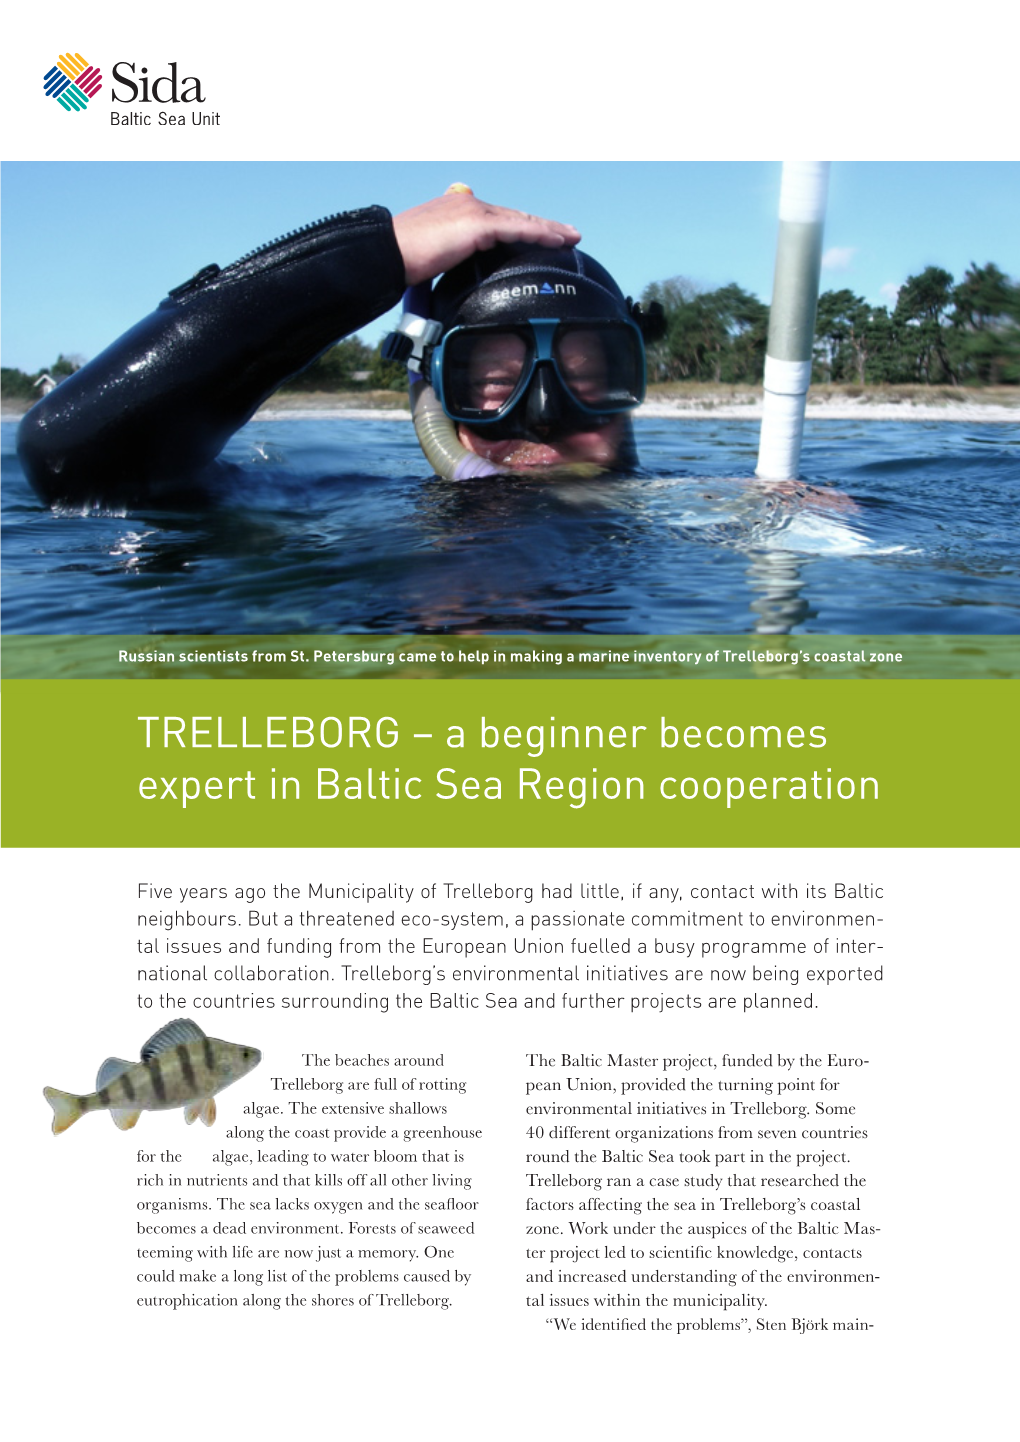 TRELLEBORG – a Beginner Becomes Expert in Baltic Sea Region Cooperation